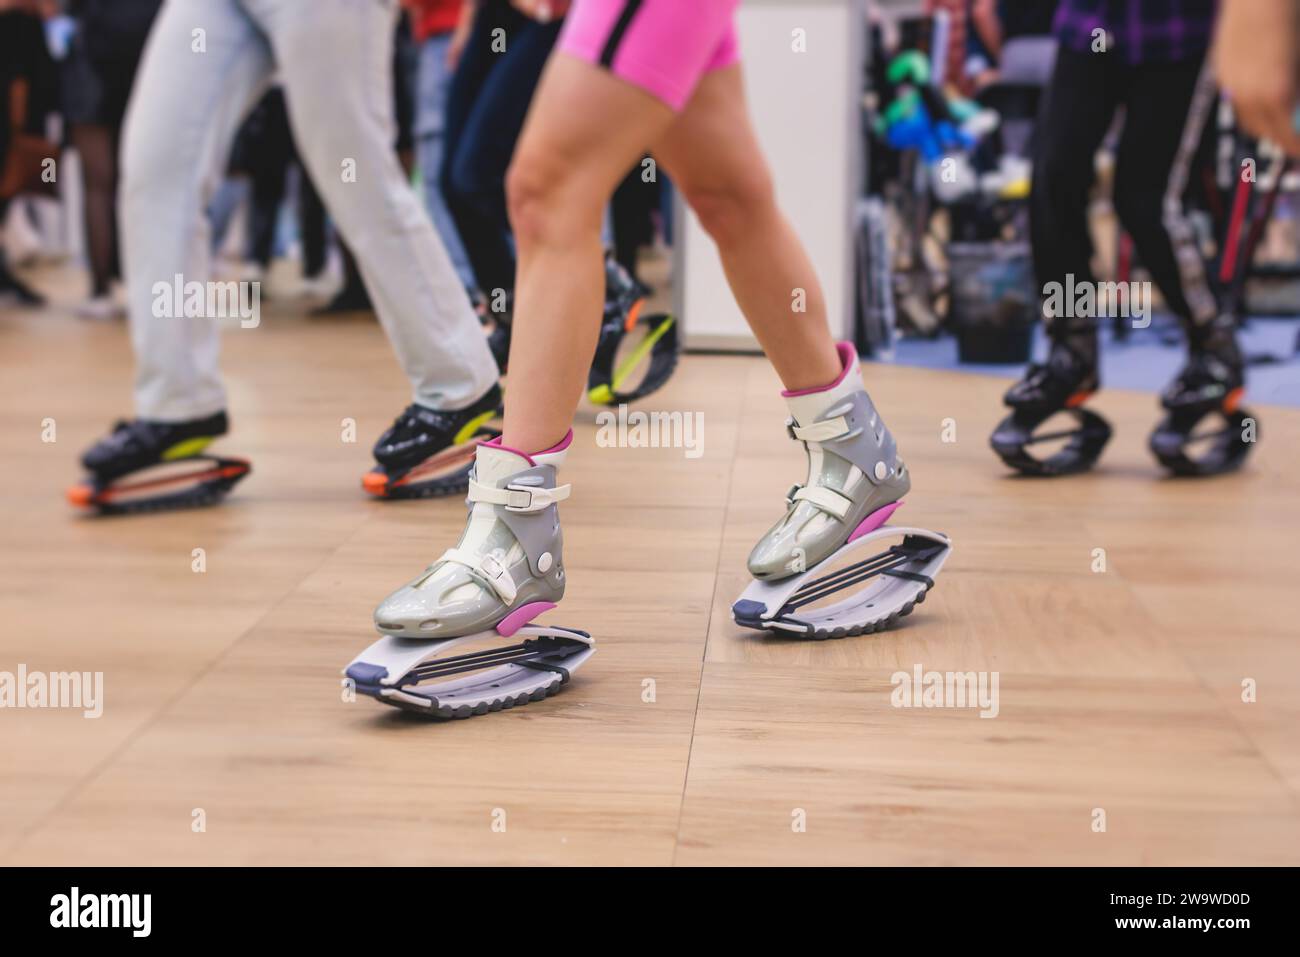 Premium Photo  Female trainer doing exercises jumping in the kangoo jumps  boots outdoor fitness workout lifestyle